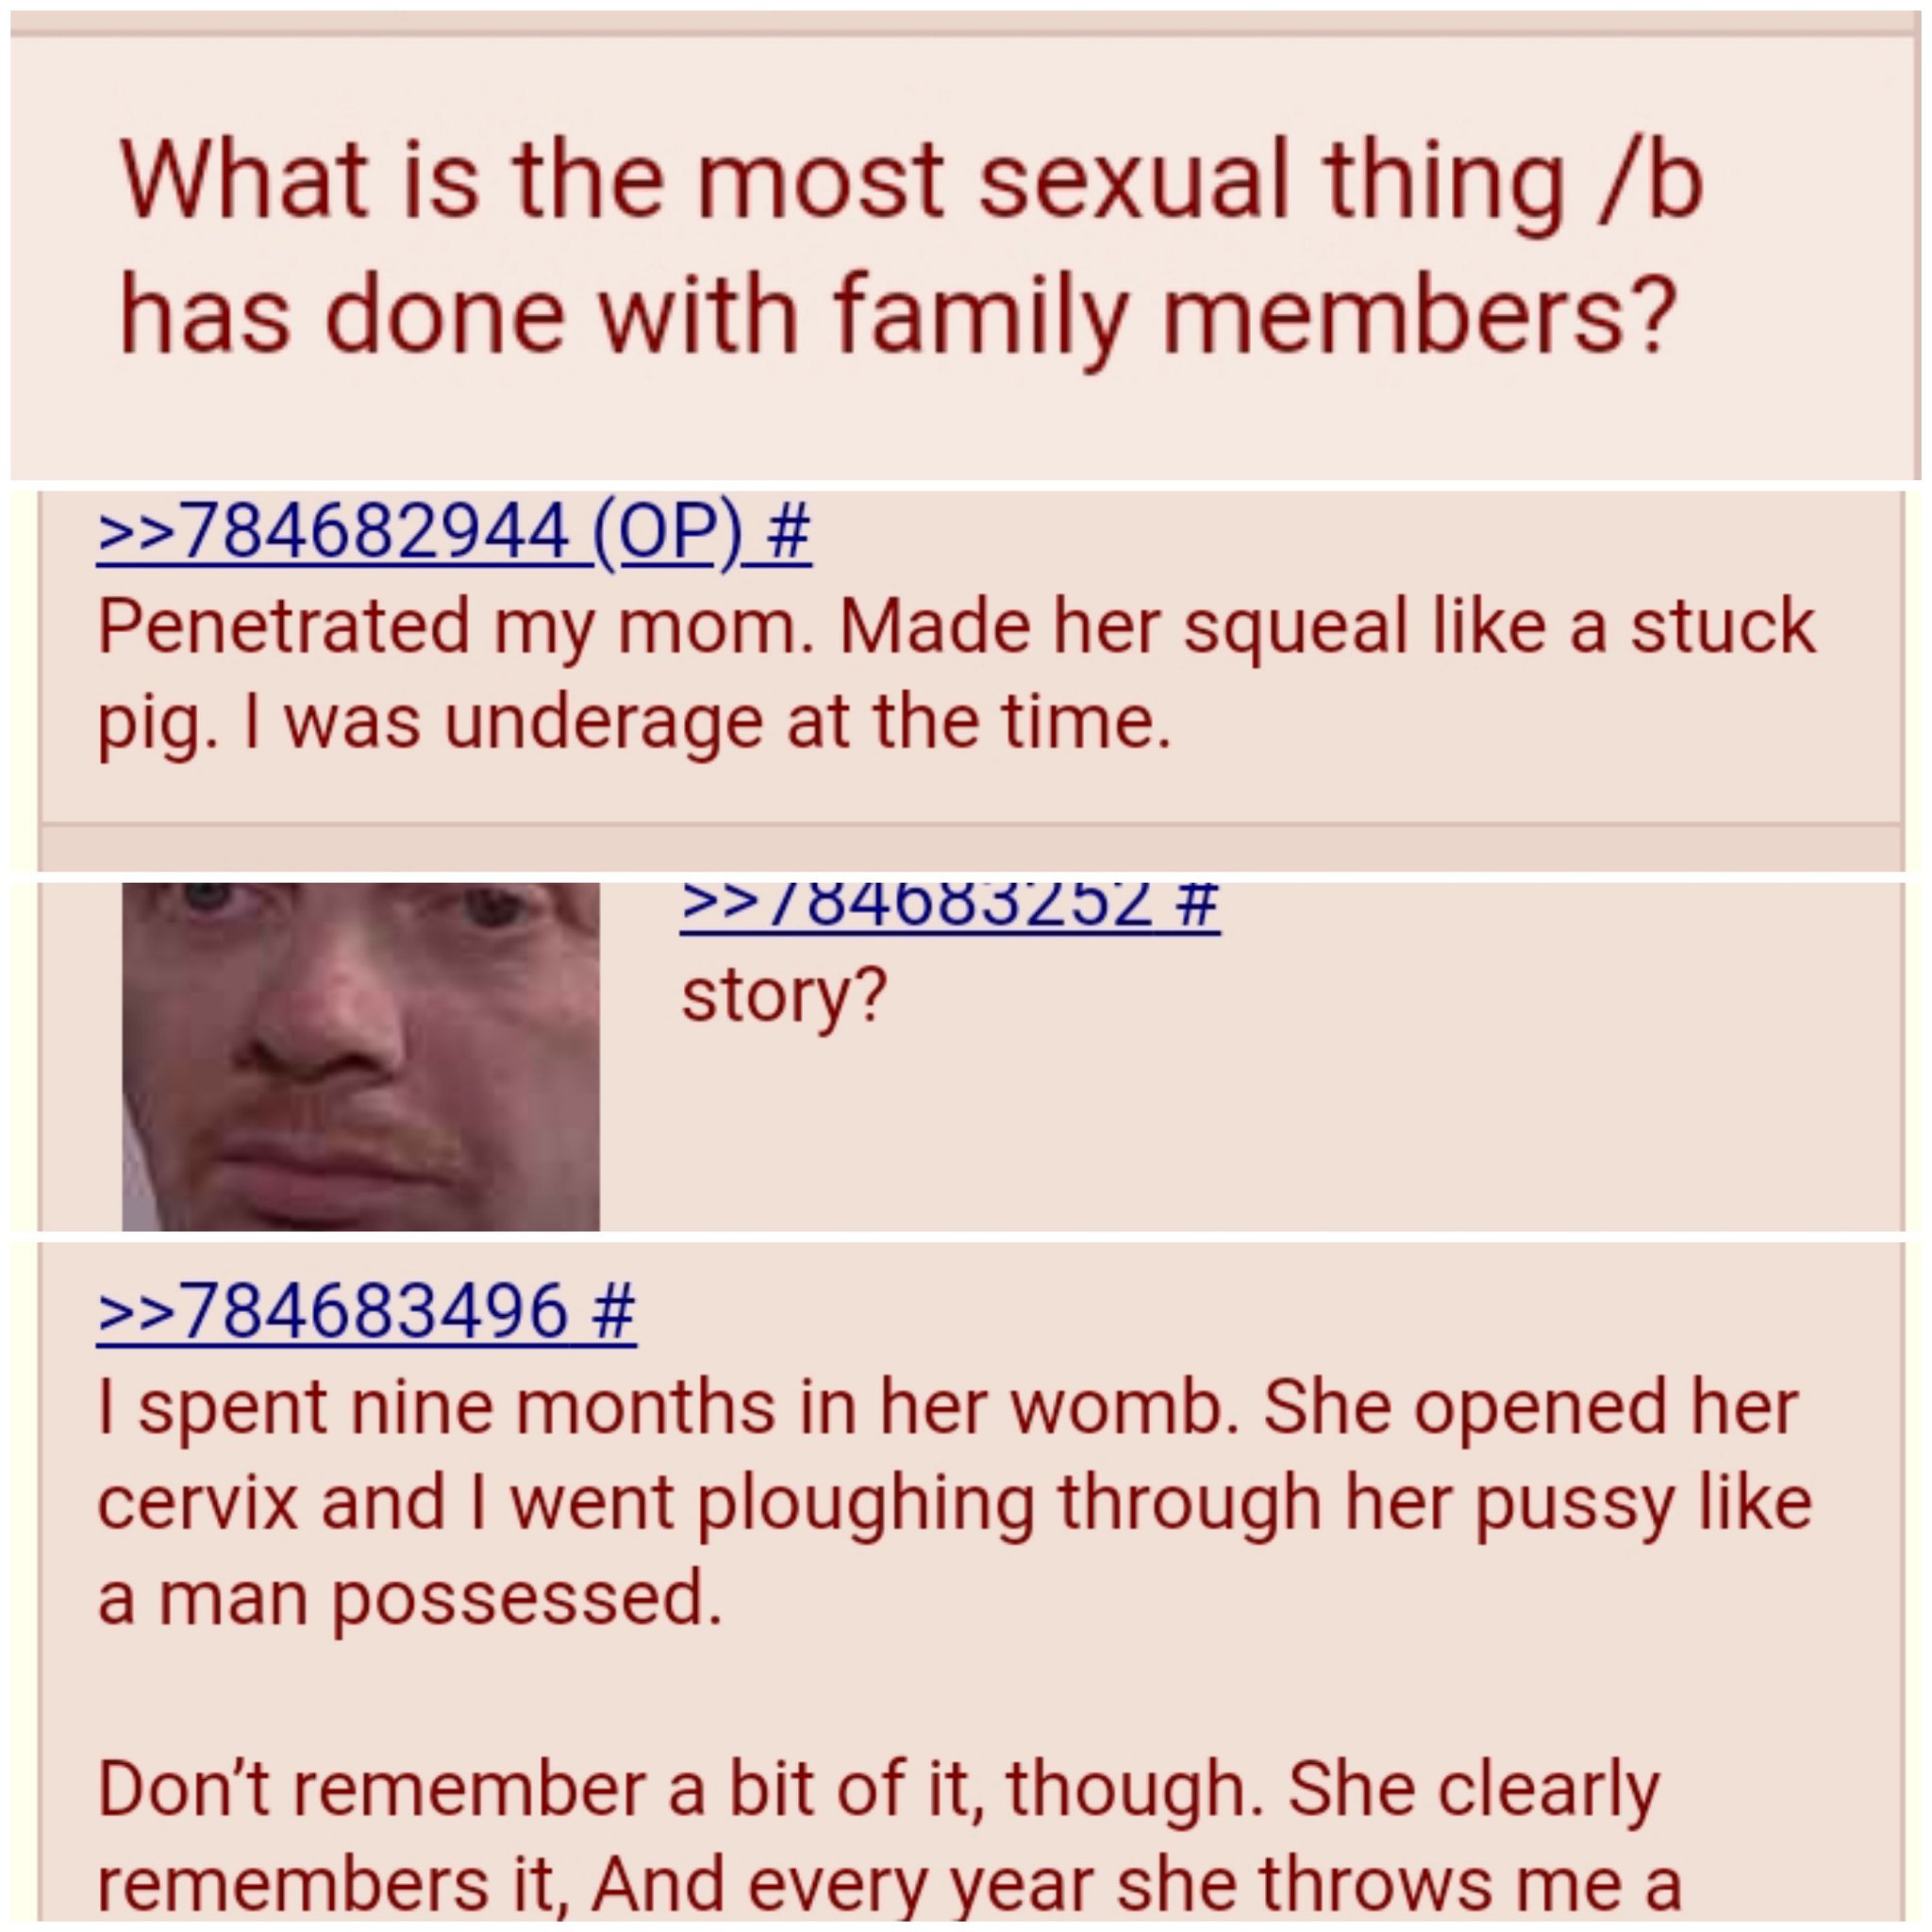 Browsing the Chans when suddenly... - meme